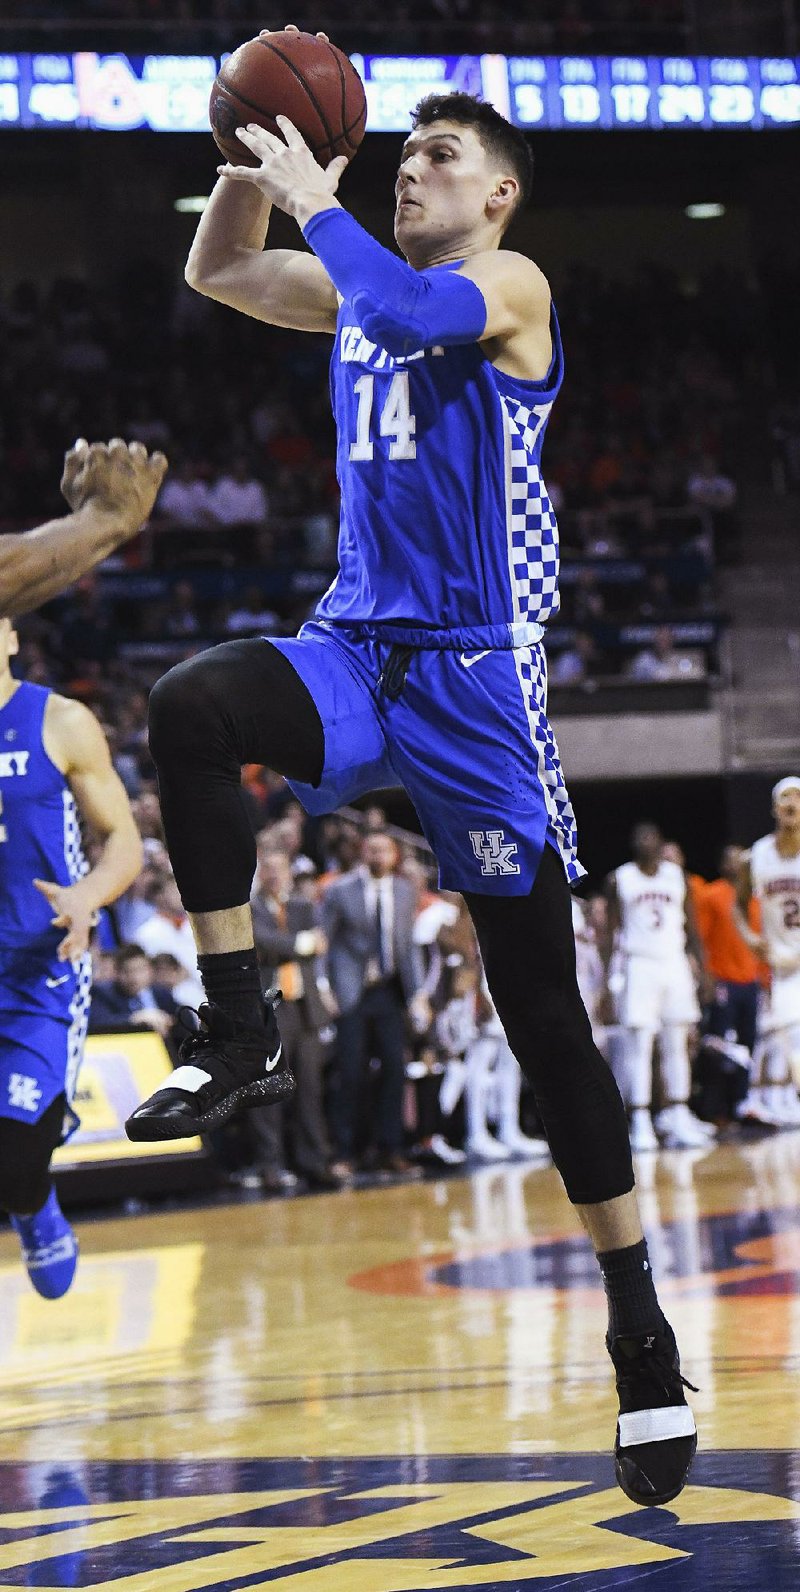 Kentucky guard Tyler Herro (14) scored 10 points in the final 5:23, and made two free throws with 24 seconds left to help lift the No. 12 Wildcats to an 82-80 victory over No. 14 Auburn on Saturday in Auburn, Ala.